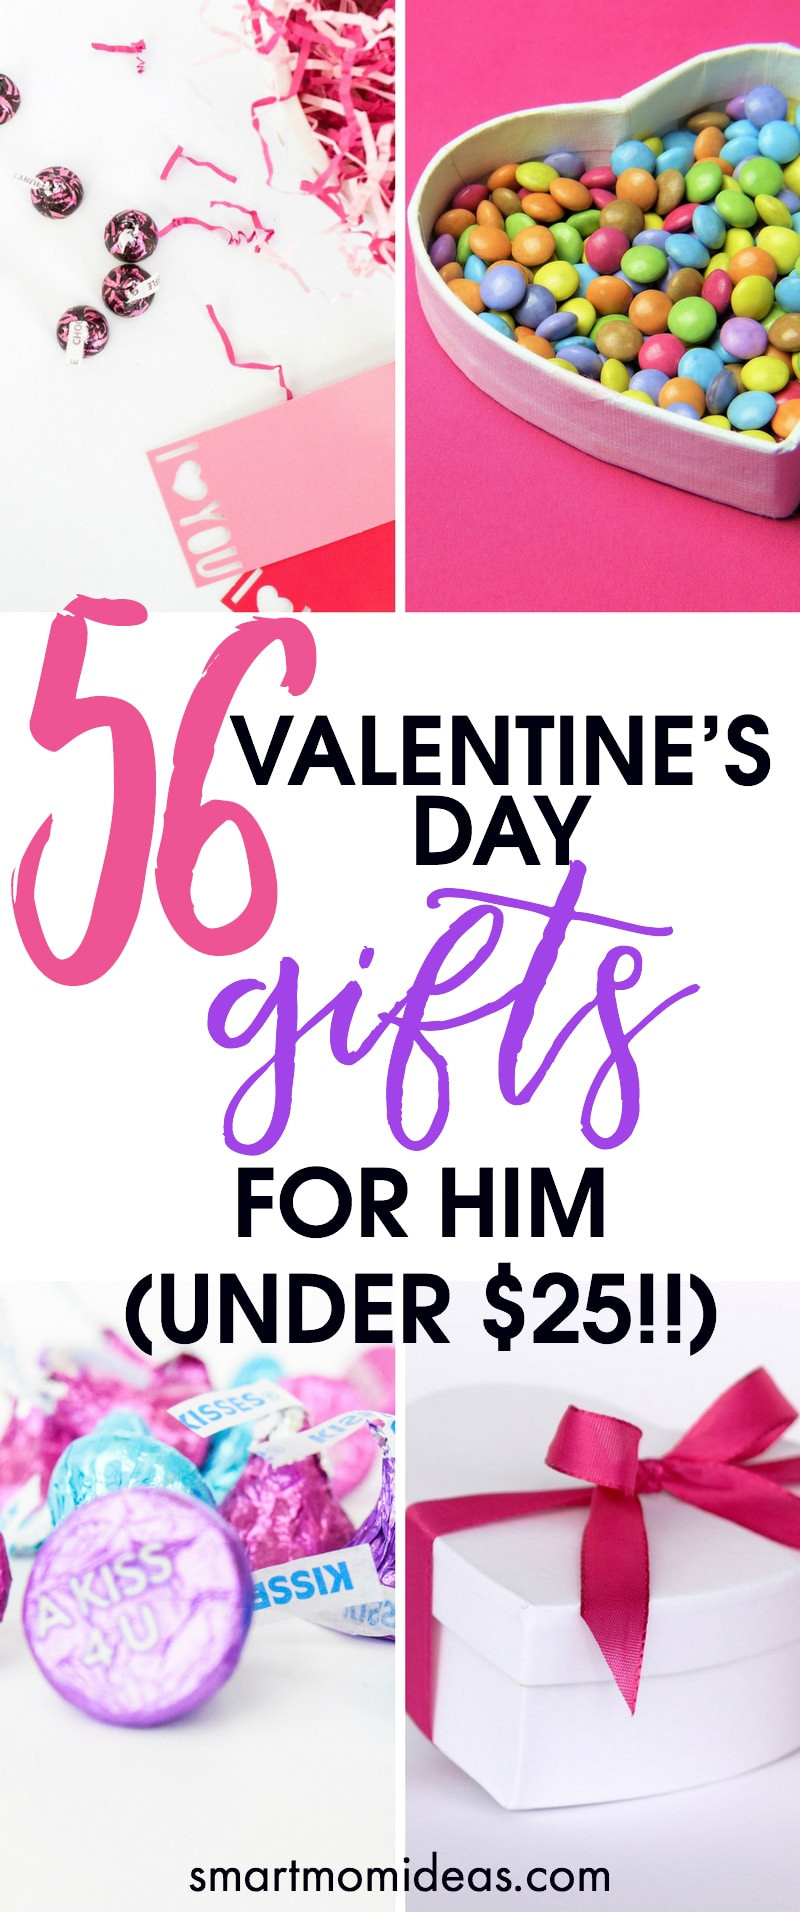 Valentine Day Gift Ideas For Him
 56 Valentine’s Day Gifts for Him Under $25